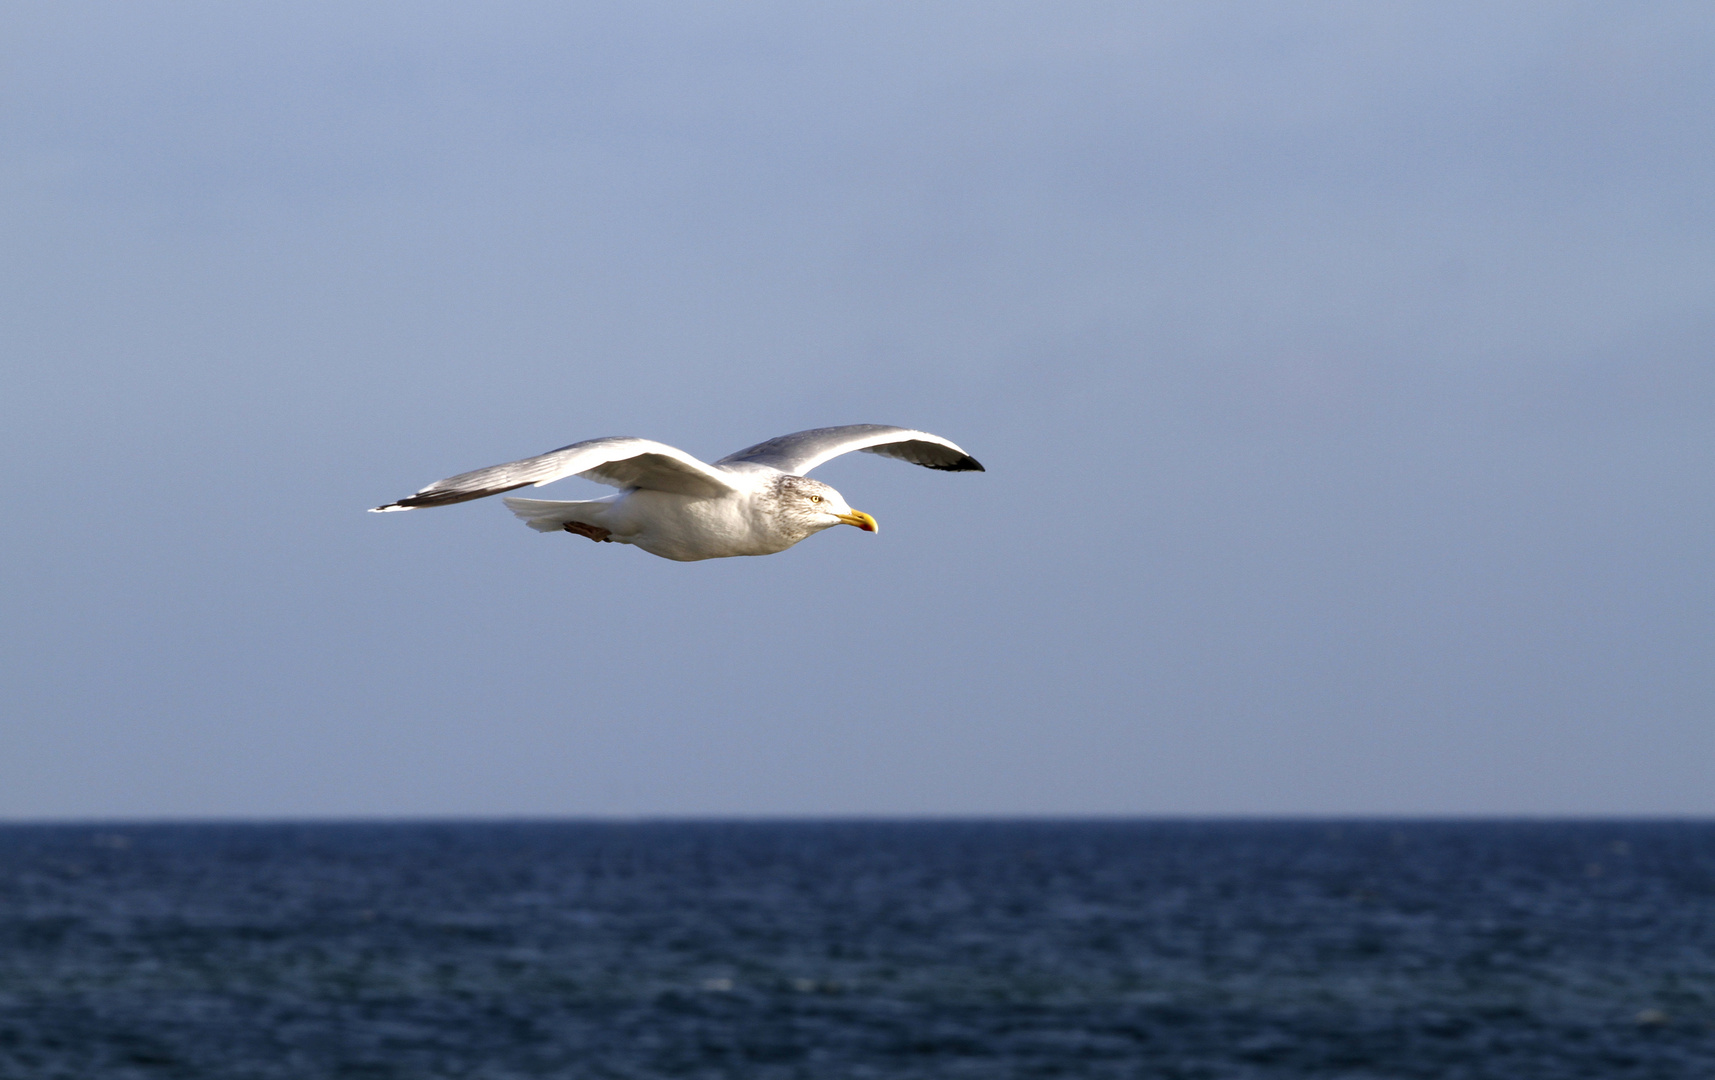 Fly of the seagull